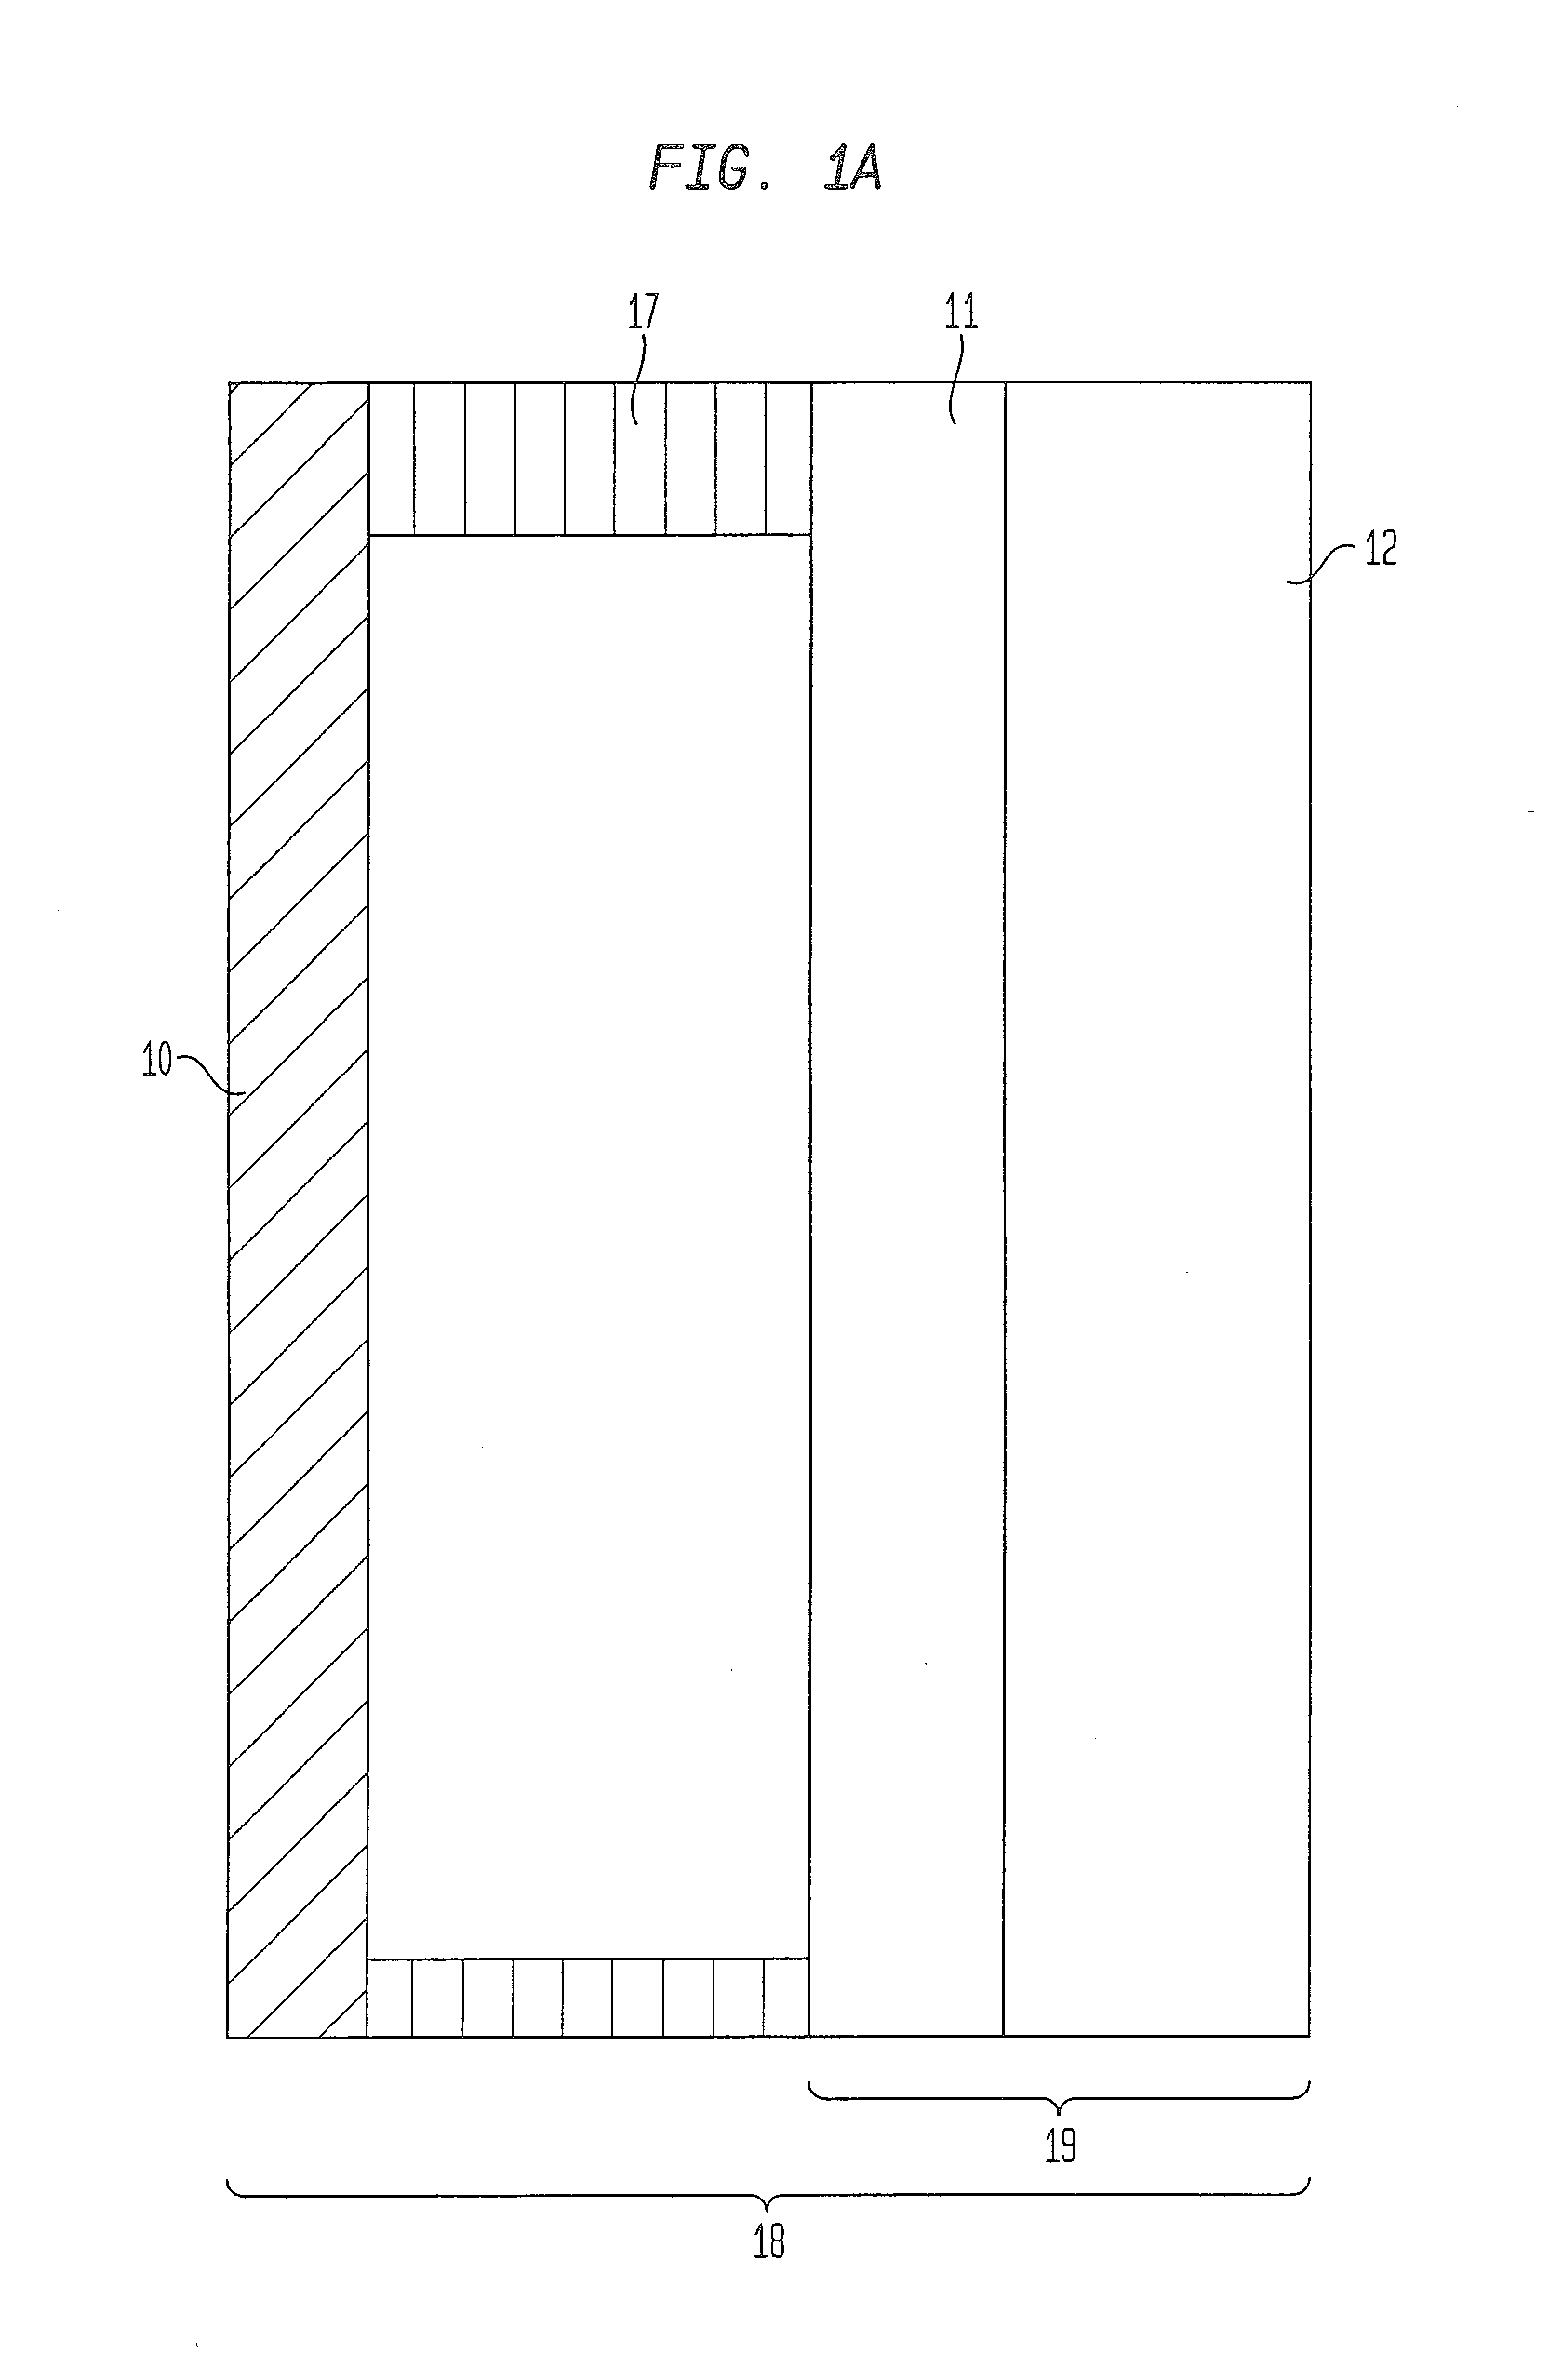 Lamination of electrochromic device to glass substrates